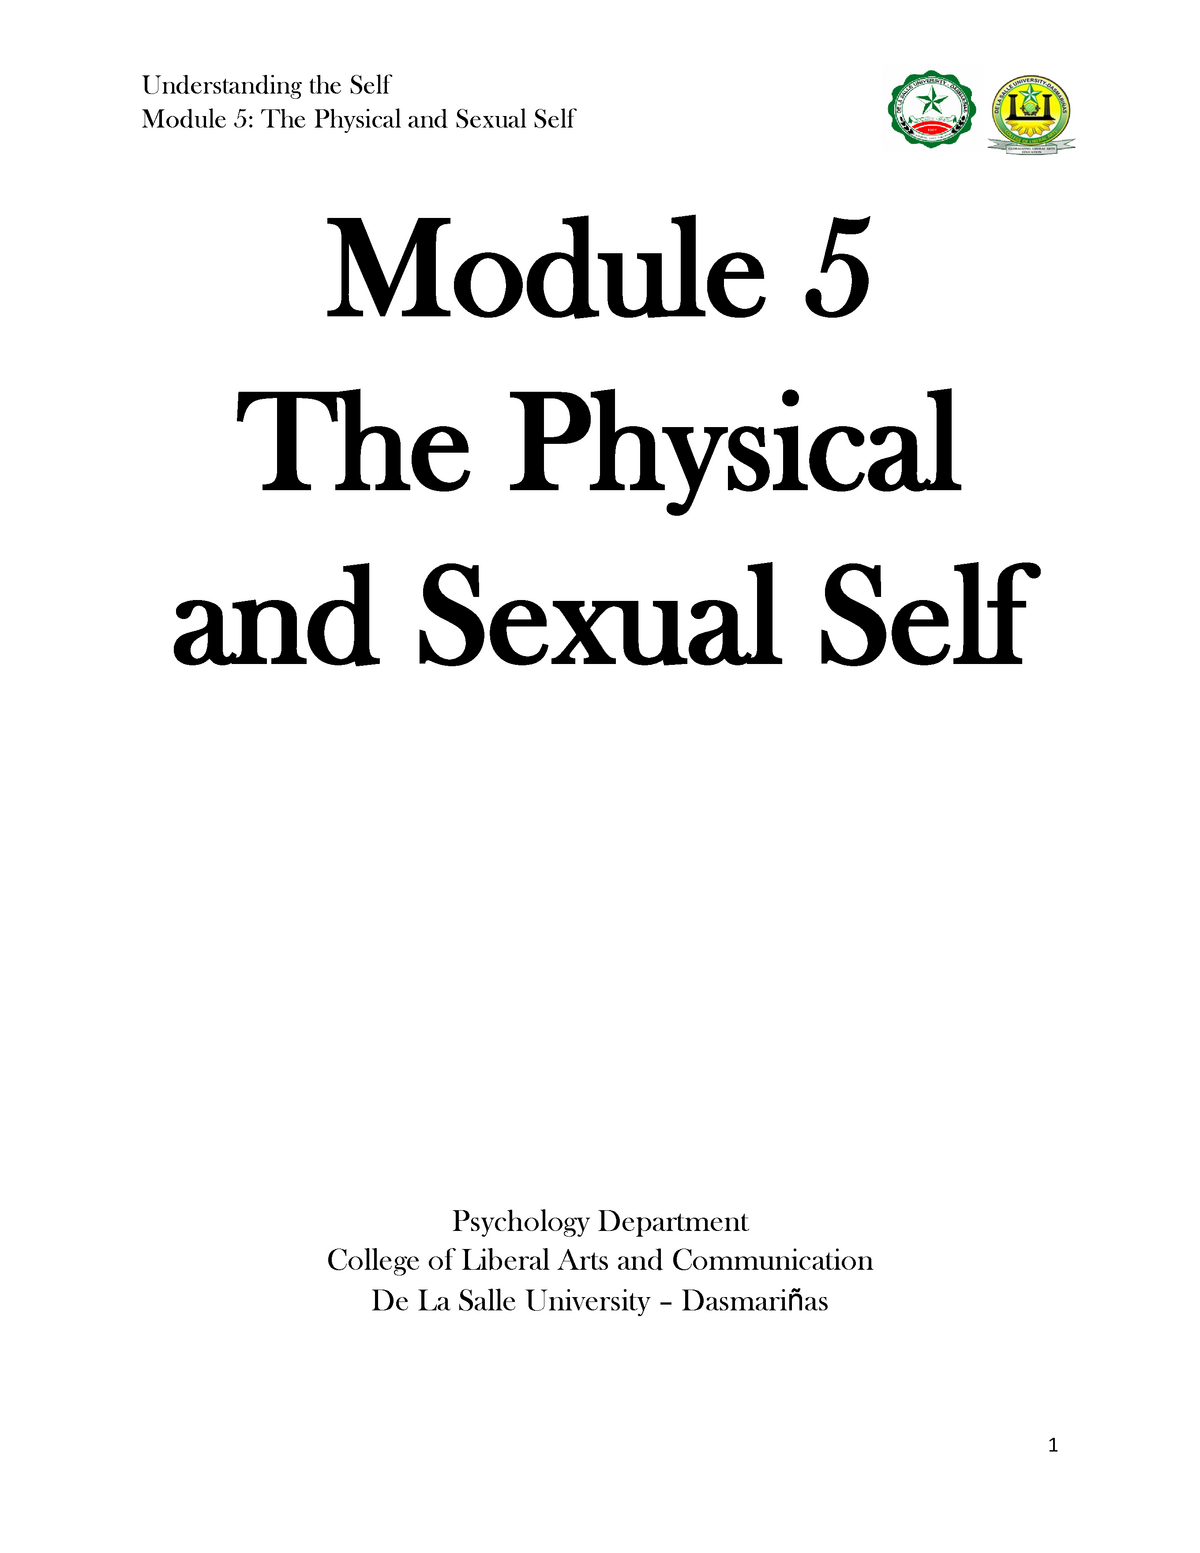 Phyiscal And Sexual Self Module 5 The Physical And Sexual Self Module 5 The Physical And